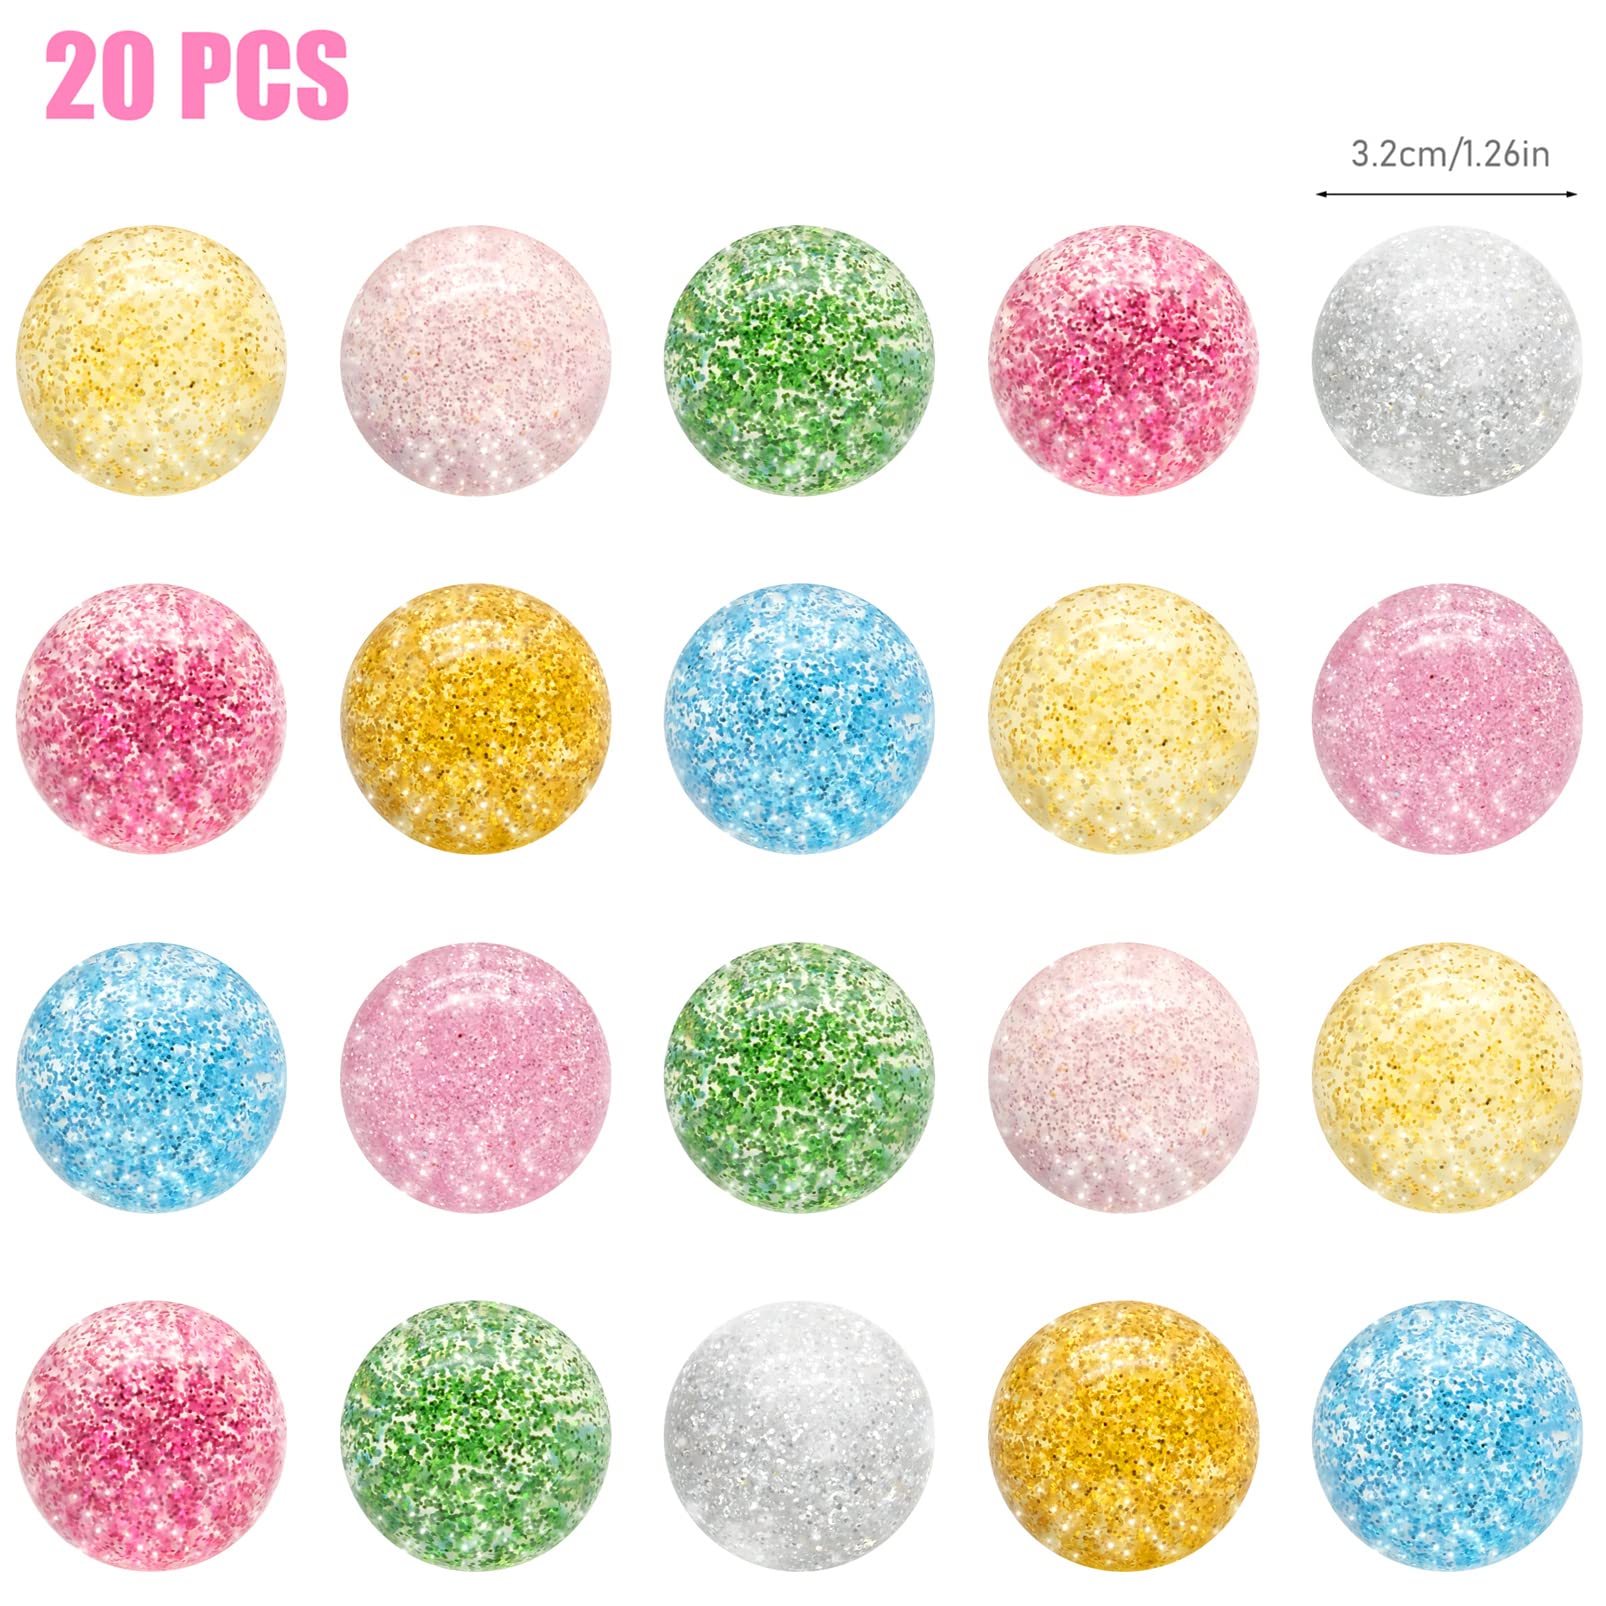 inheming 20 Pieces Bouncy Balls, 32 mm Glitter Bounce Balls for Kids, Colorful Bouncing Balls for Birthday Gift, Party Favor, Vending Machines